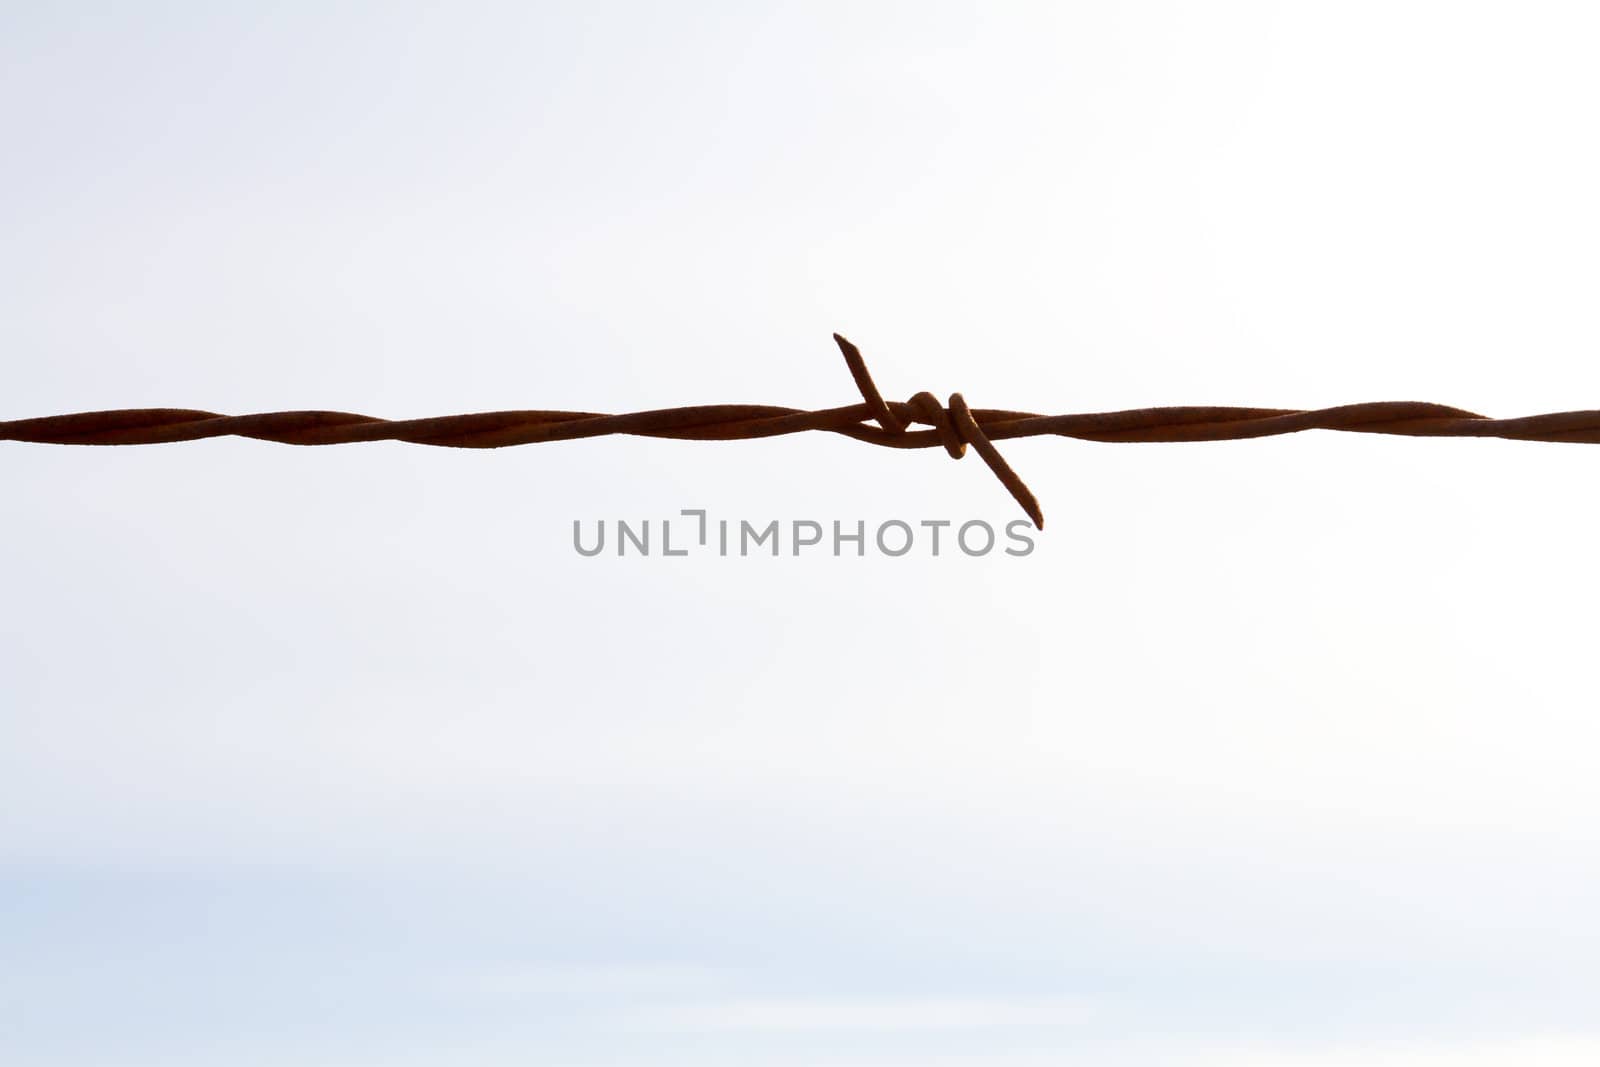 This color image shows nothing but a piece of barbed wire against a cloudy sky to create a very simple abstract background with the fencing.